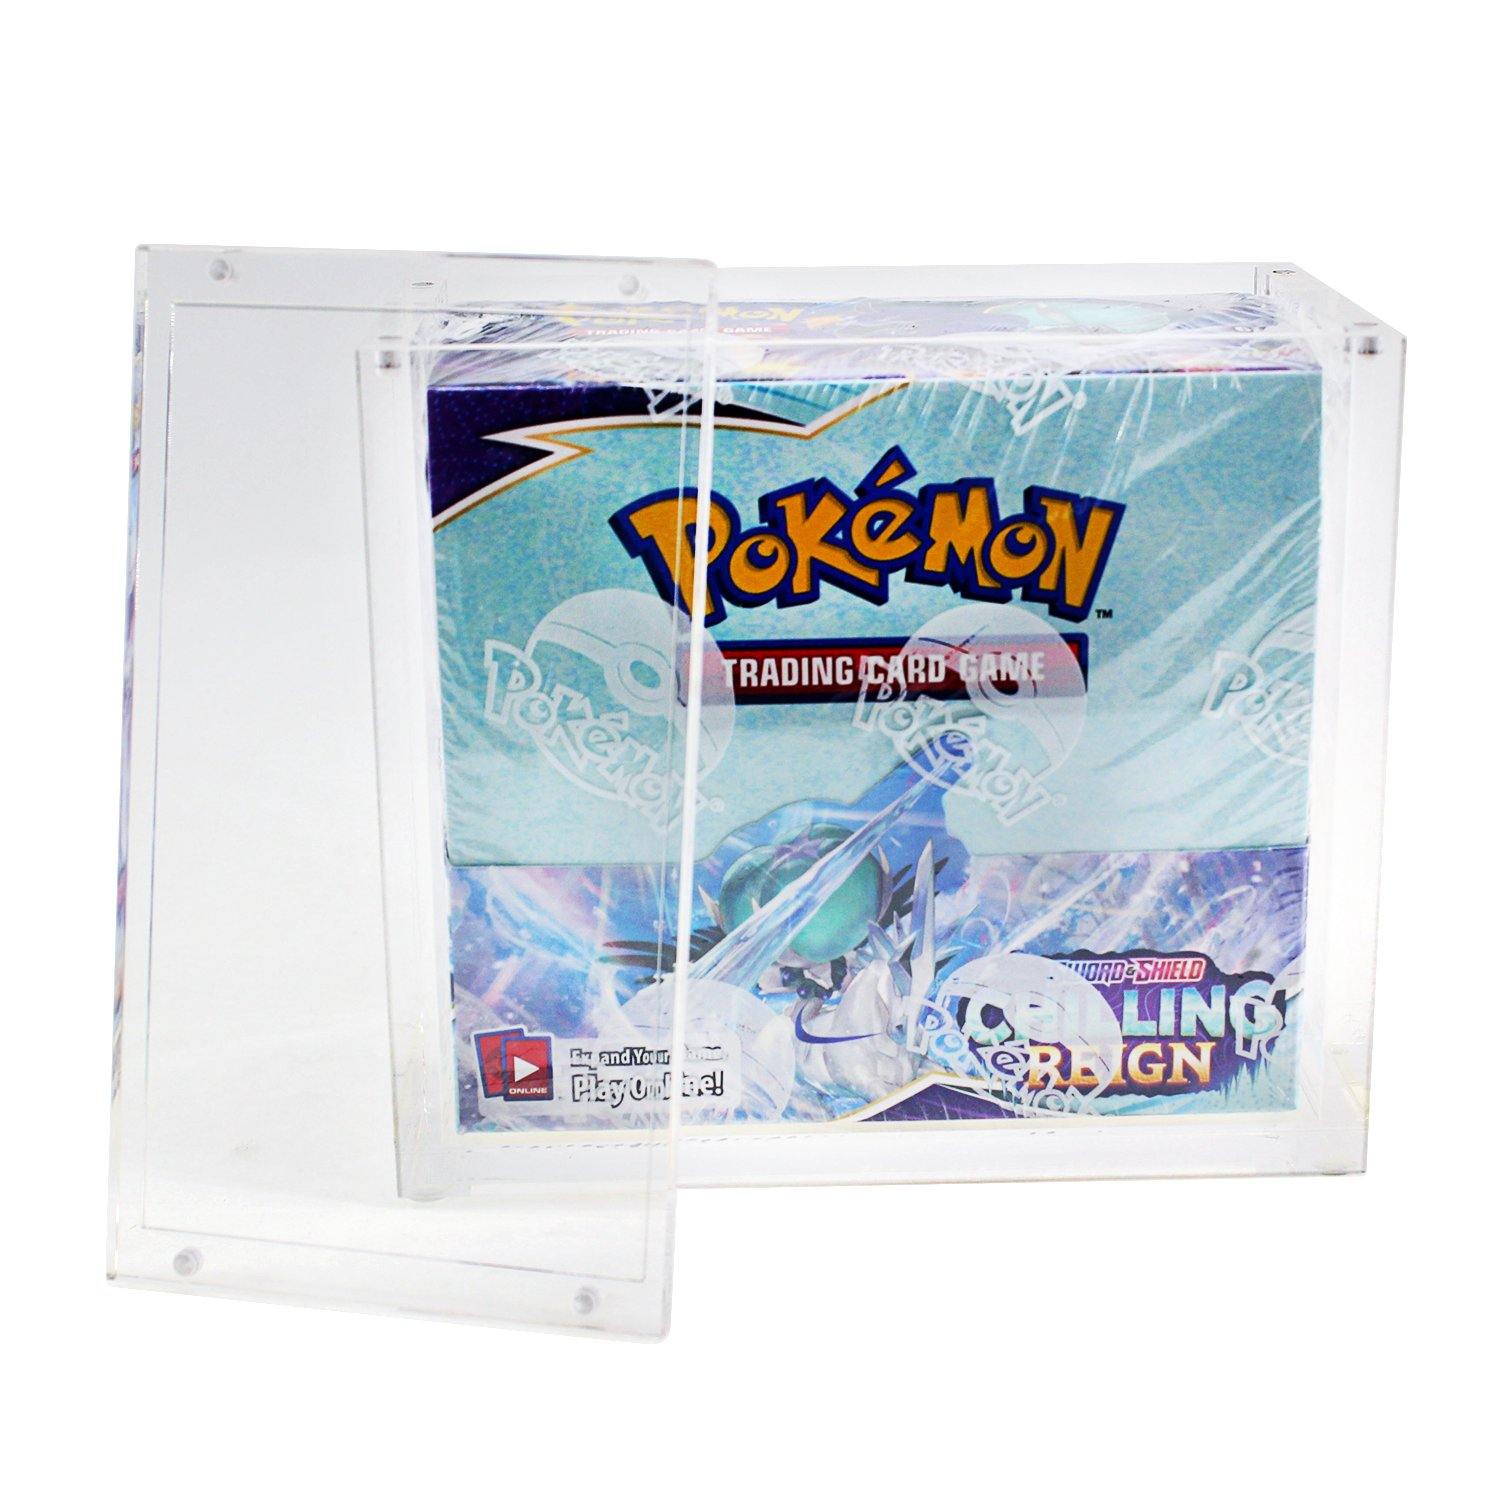 Premium Acrylic Case for Pokemon Booster Box with Magnetic Top - Platinum Protectors